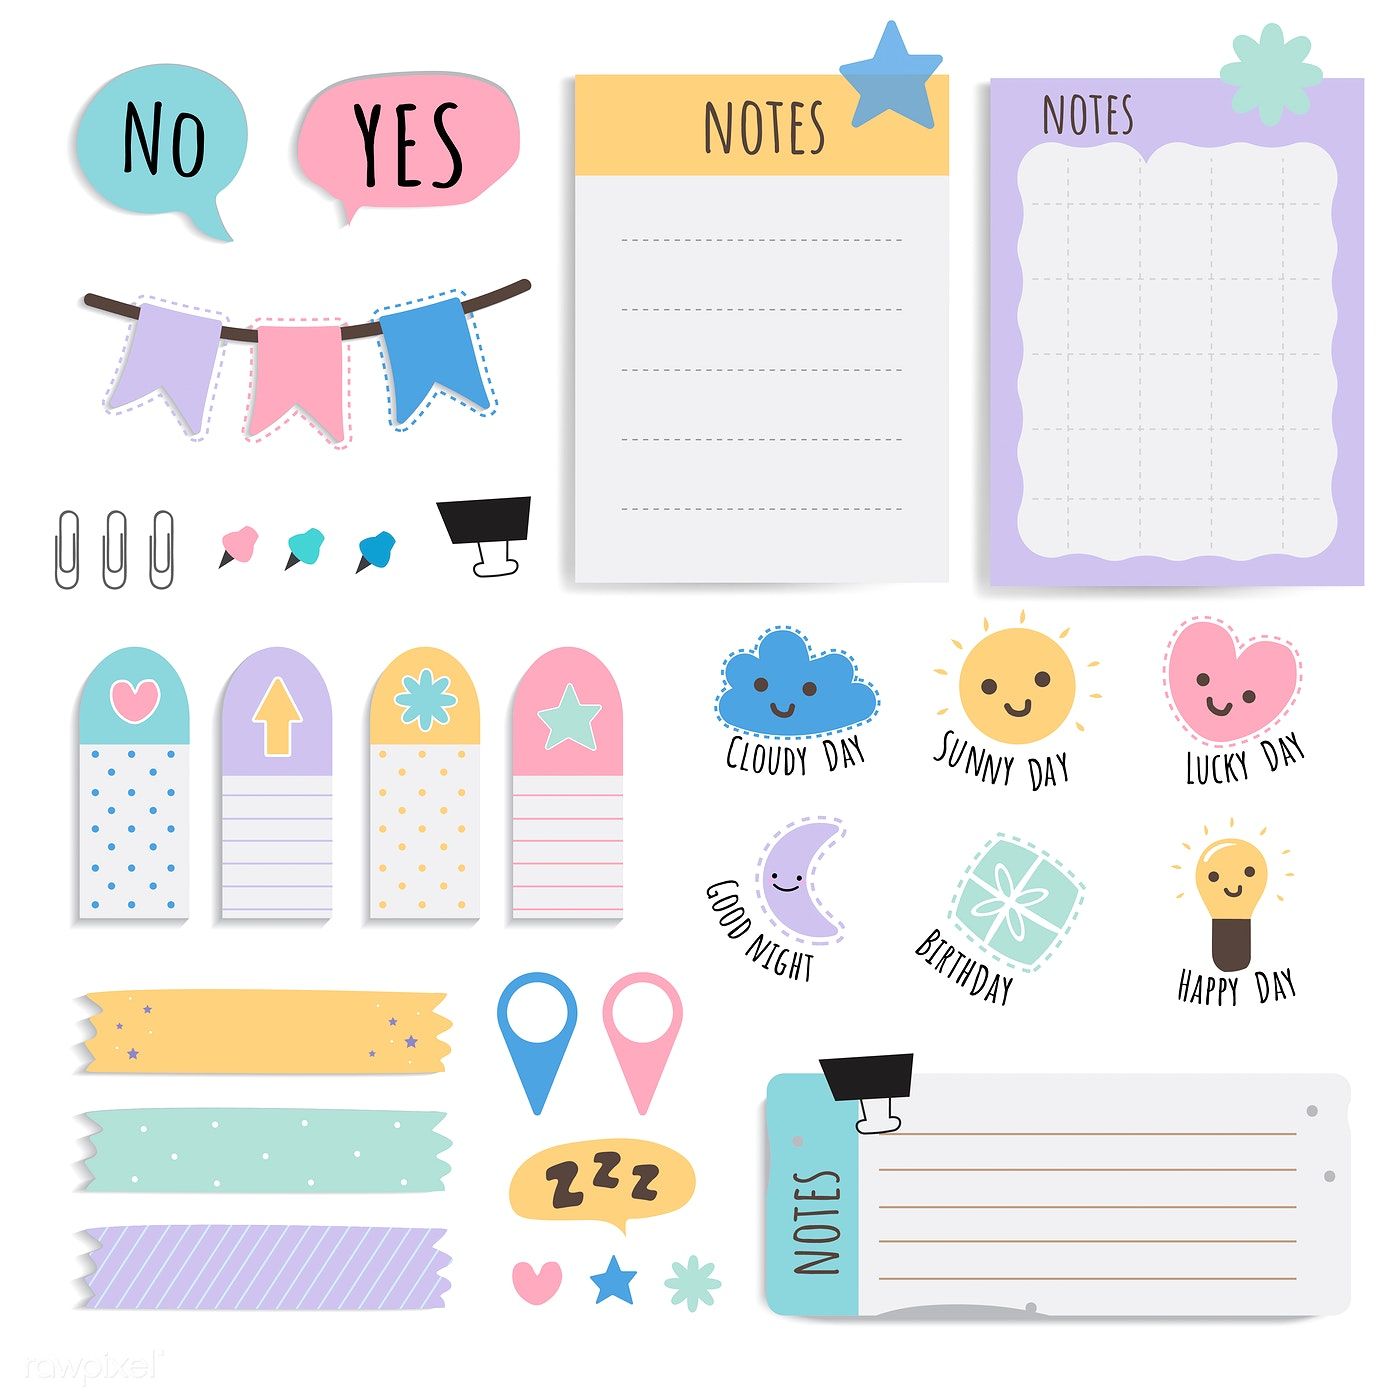 notes-clipart-cute-notes-cute-transparent-free-for-download-on-webstockreview-2022